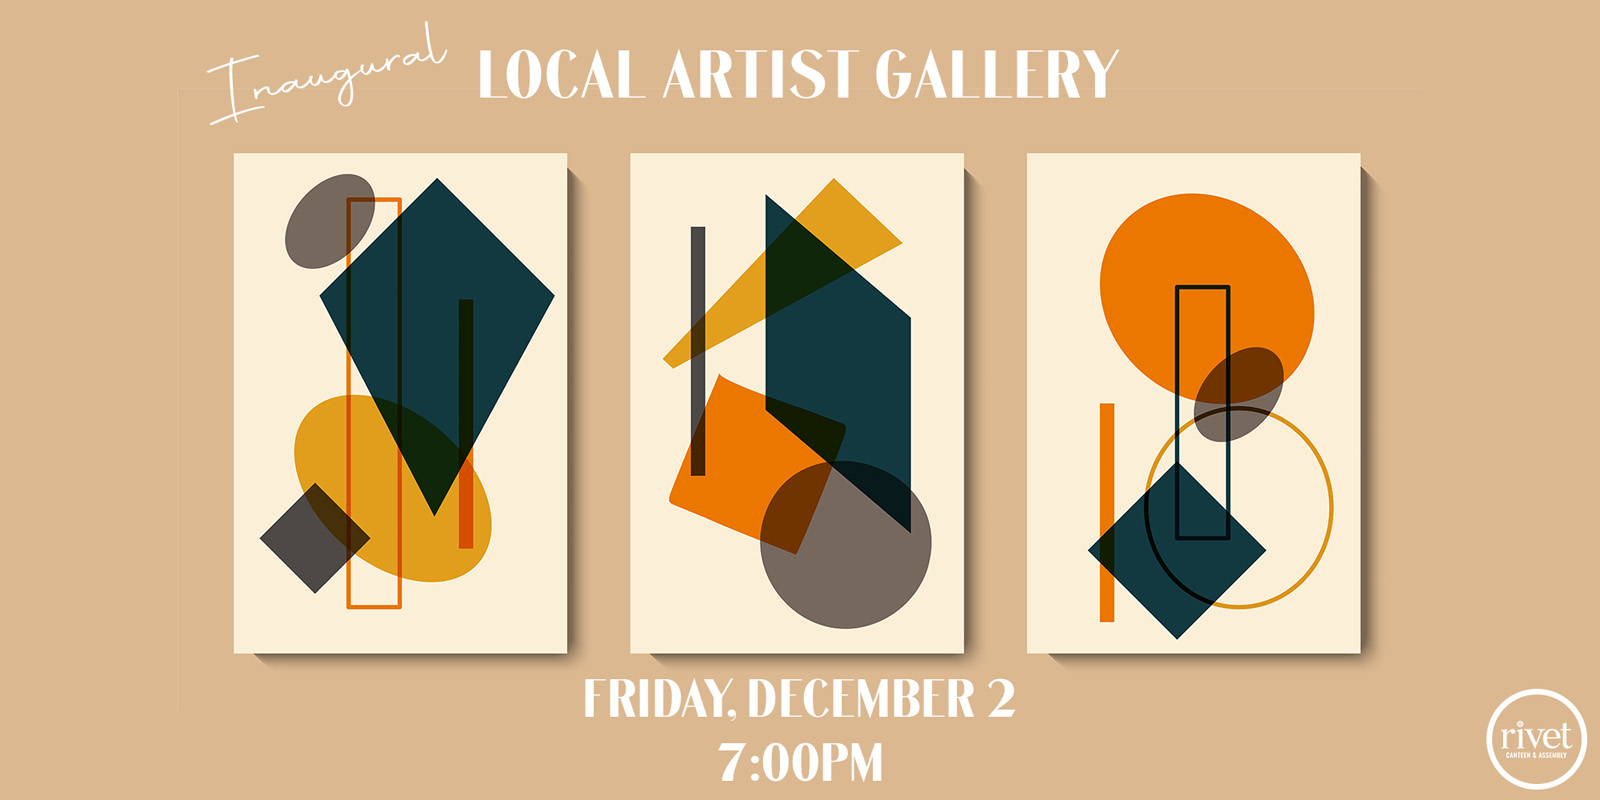 Rivet is proud to showcase the artwork of our local community members on Friday, December 2nd! Entry is free and there will be music by DJ Sharp.